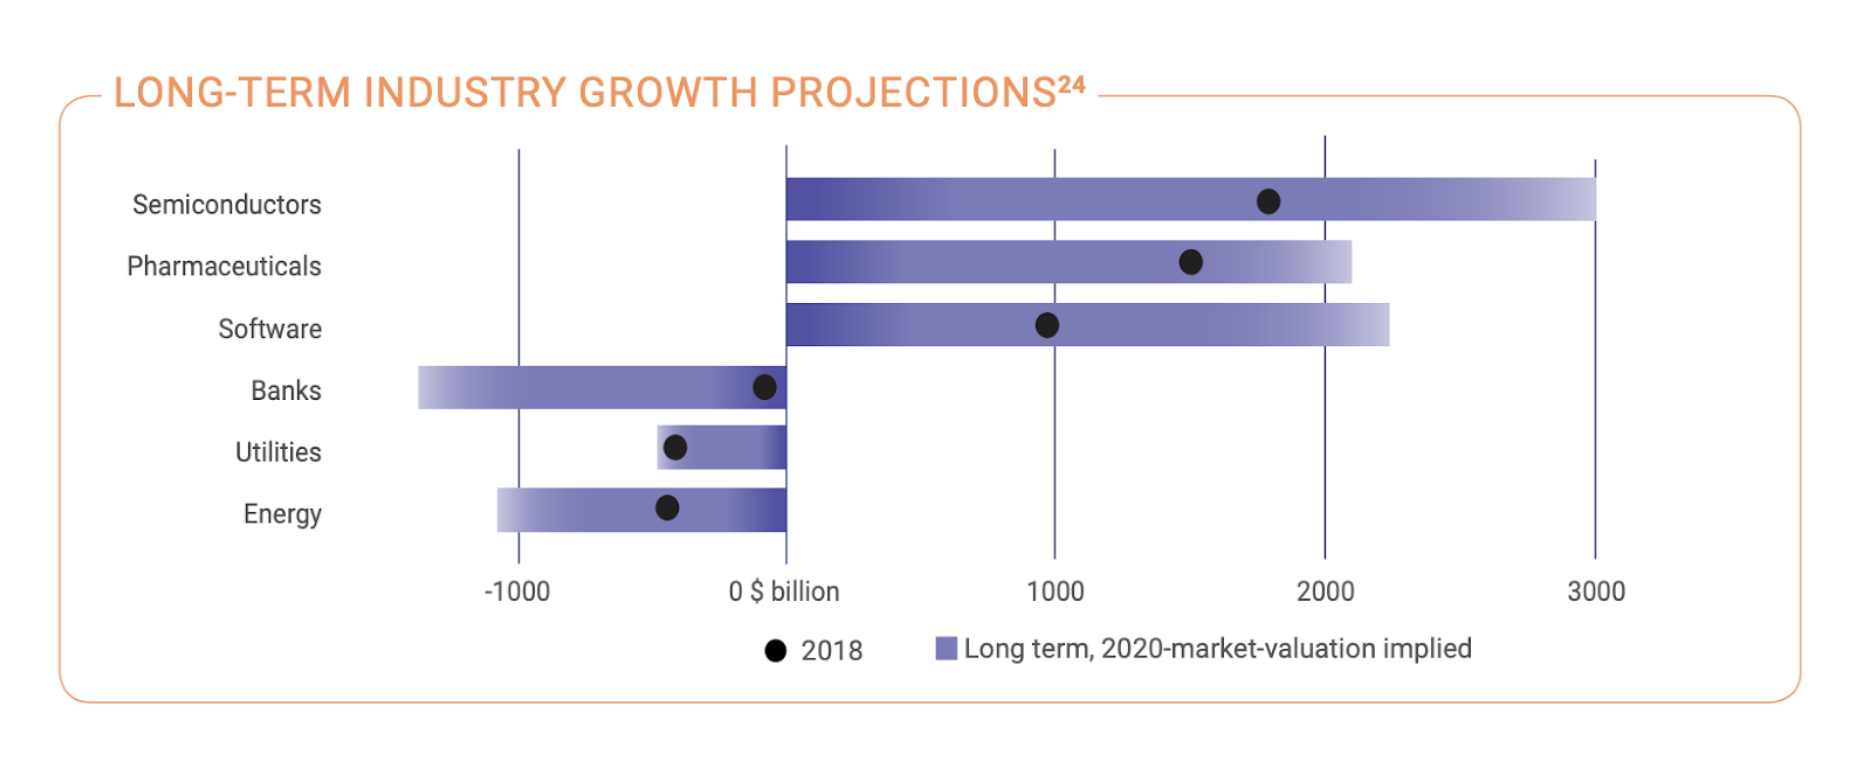 Long-term Industry Growth Projections